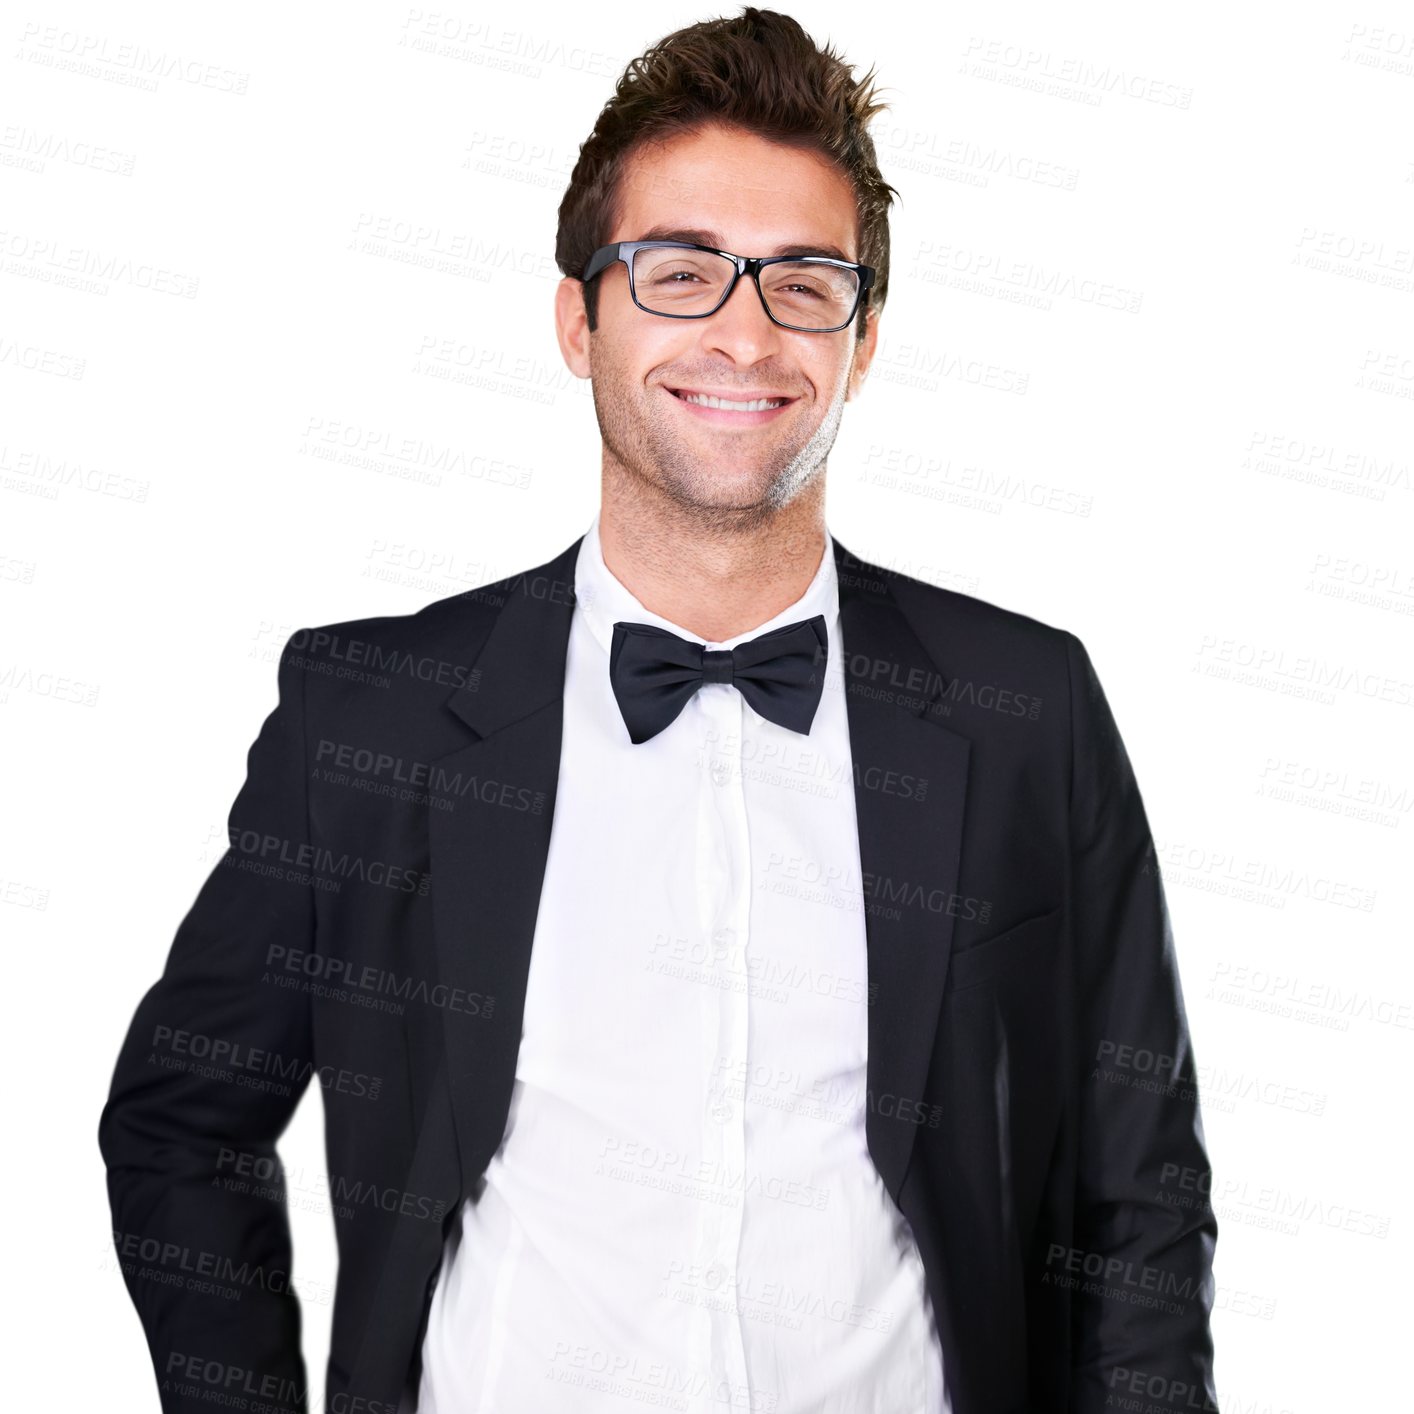 Buy stock photo Handsome, groom and glasses in tuxedo for portrait with smile in happiness. Caucasian, husband and blissful on face on isolated or a transparent png background for wedding, reception or dinner


